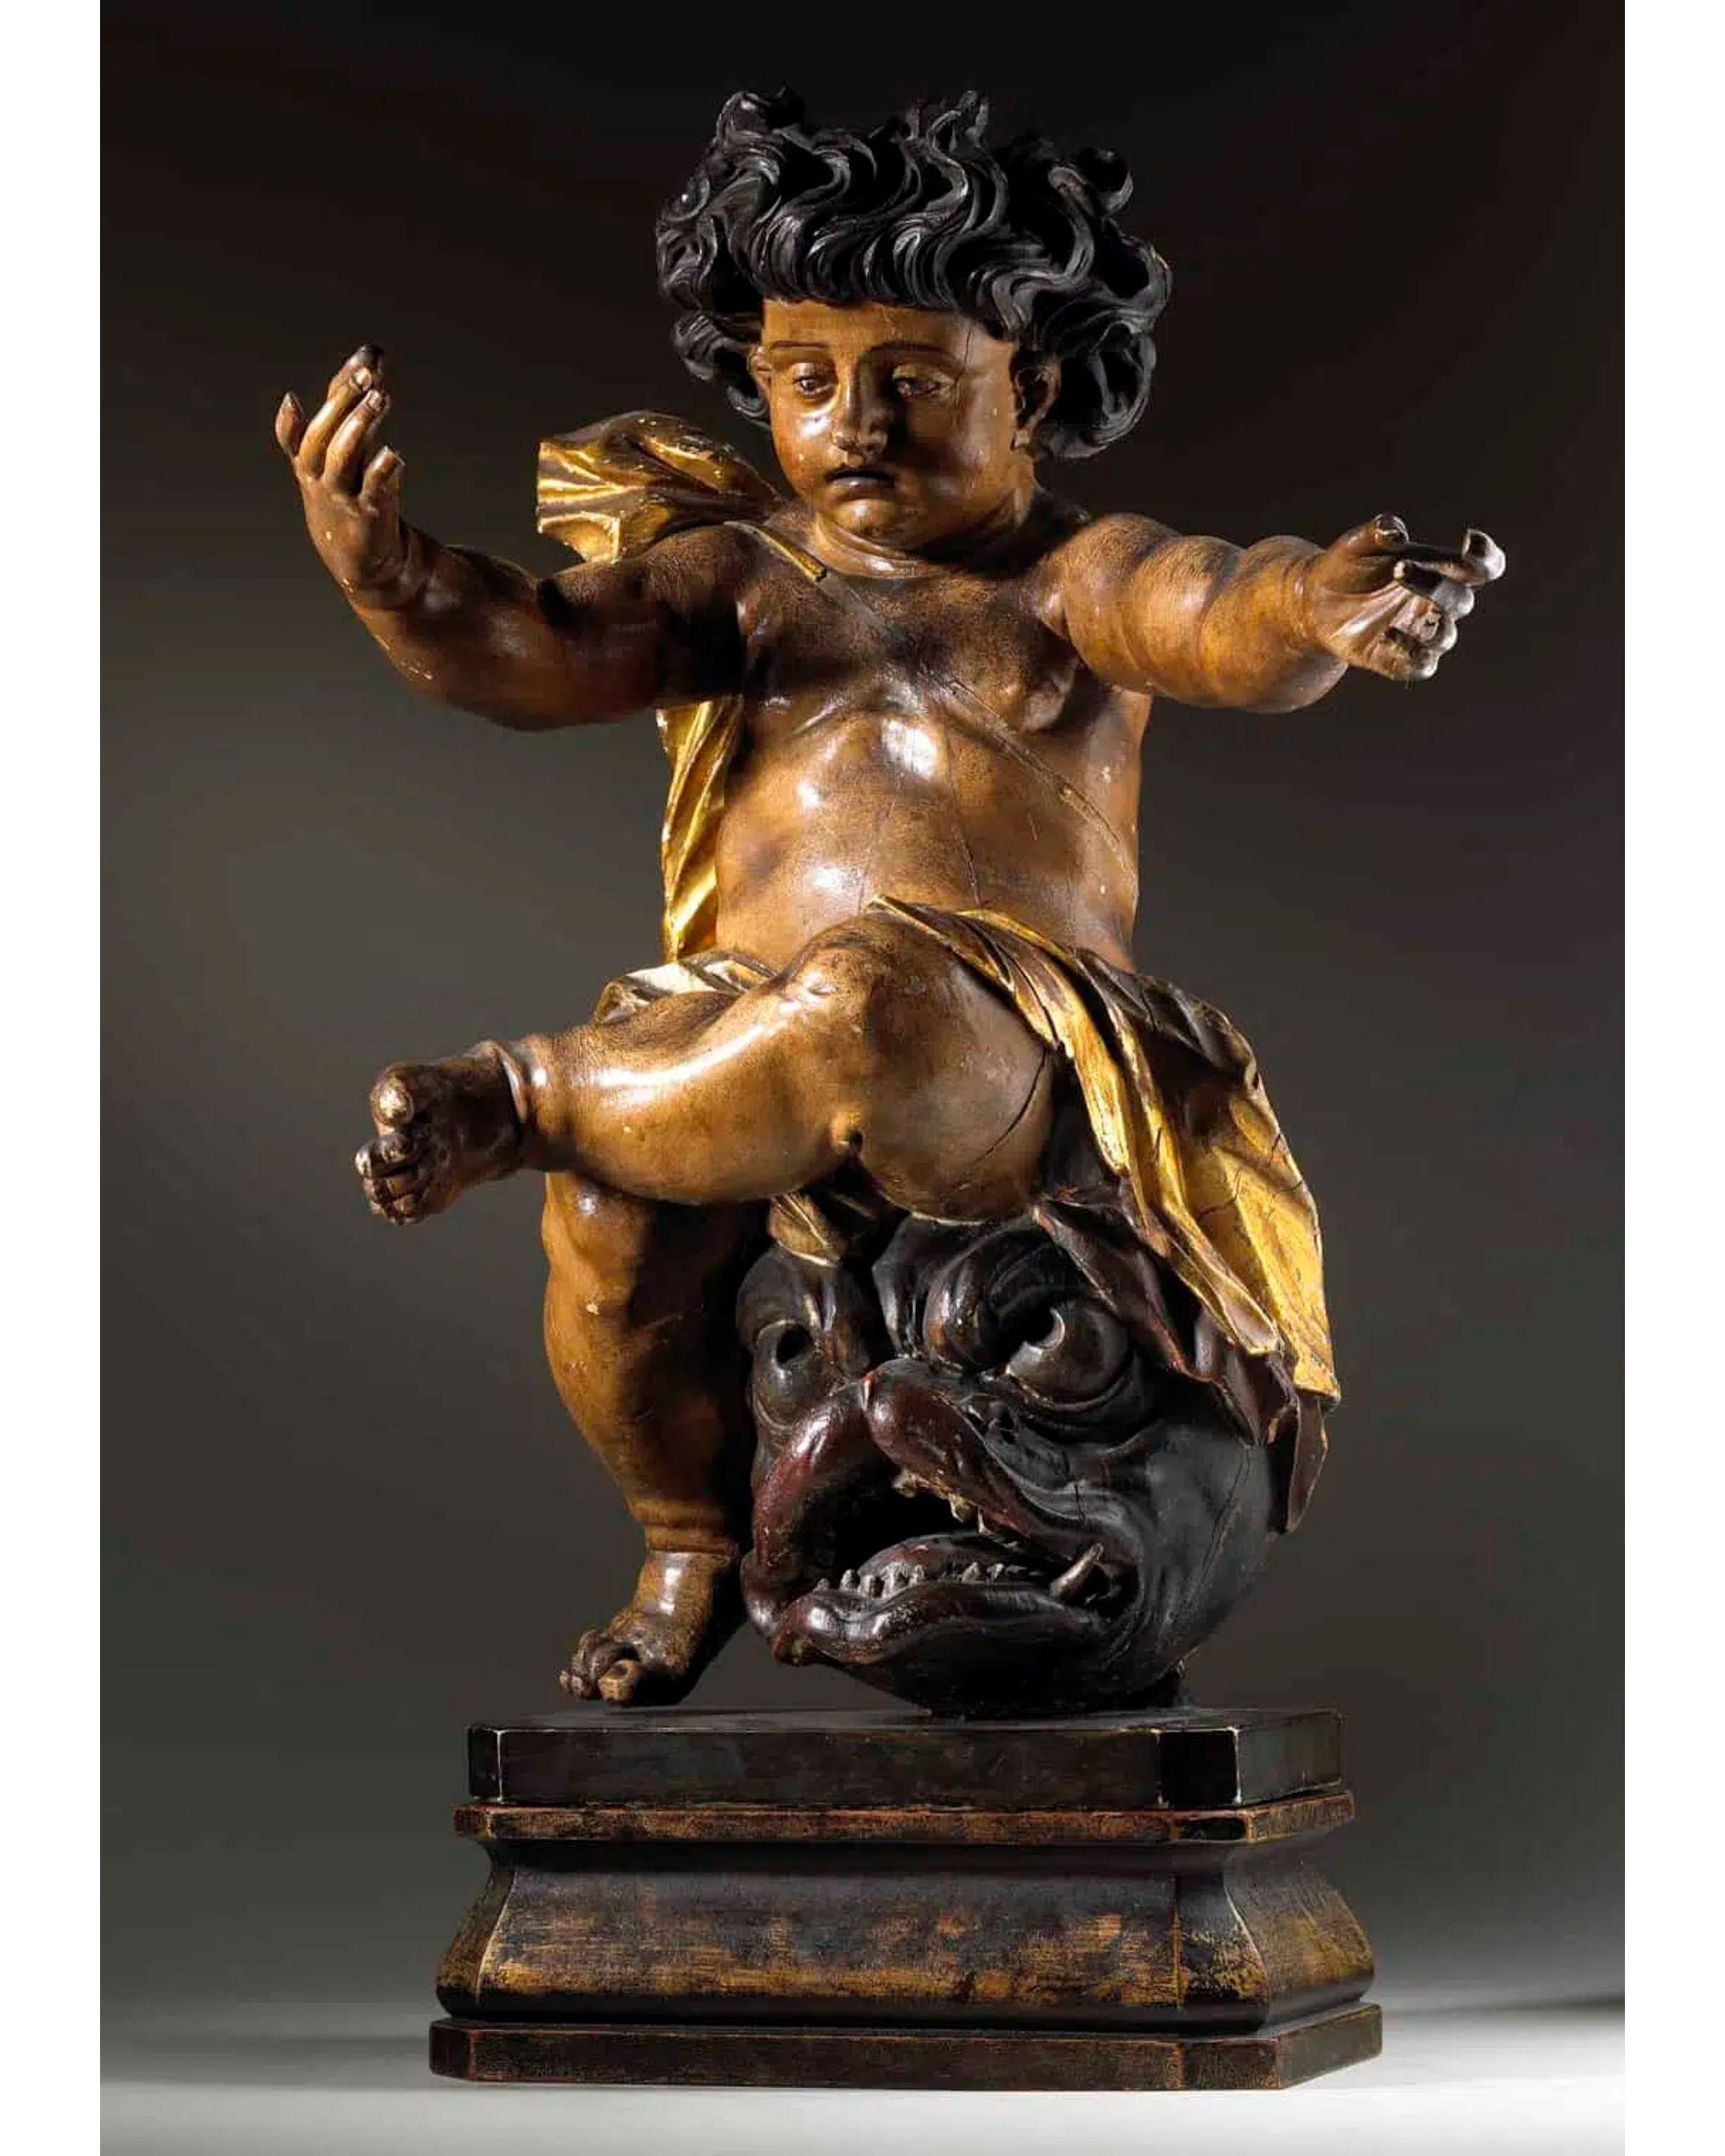 A pair of mid 17th century carved wooden and painted highly animated triumphant cherubs

Each seated on the heads satanic gargoyles. Parcel-gilt and retaining their original paint surface.

Additional information: 
Origin: Netherlands
Period: Circa